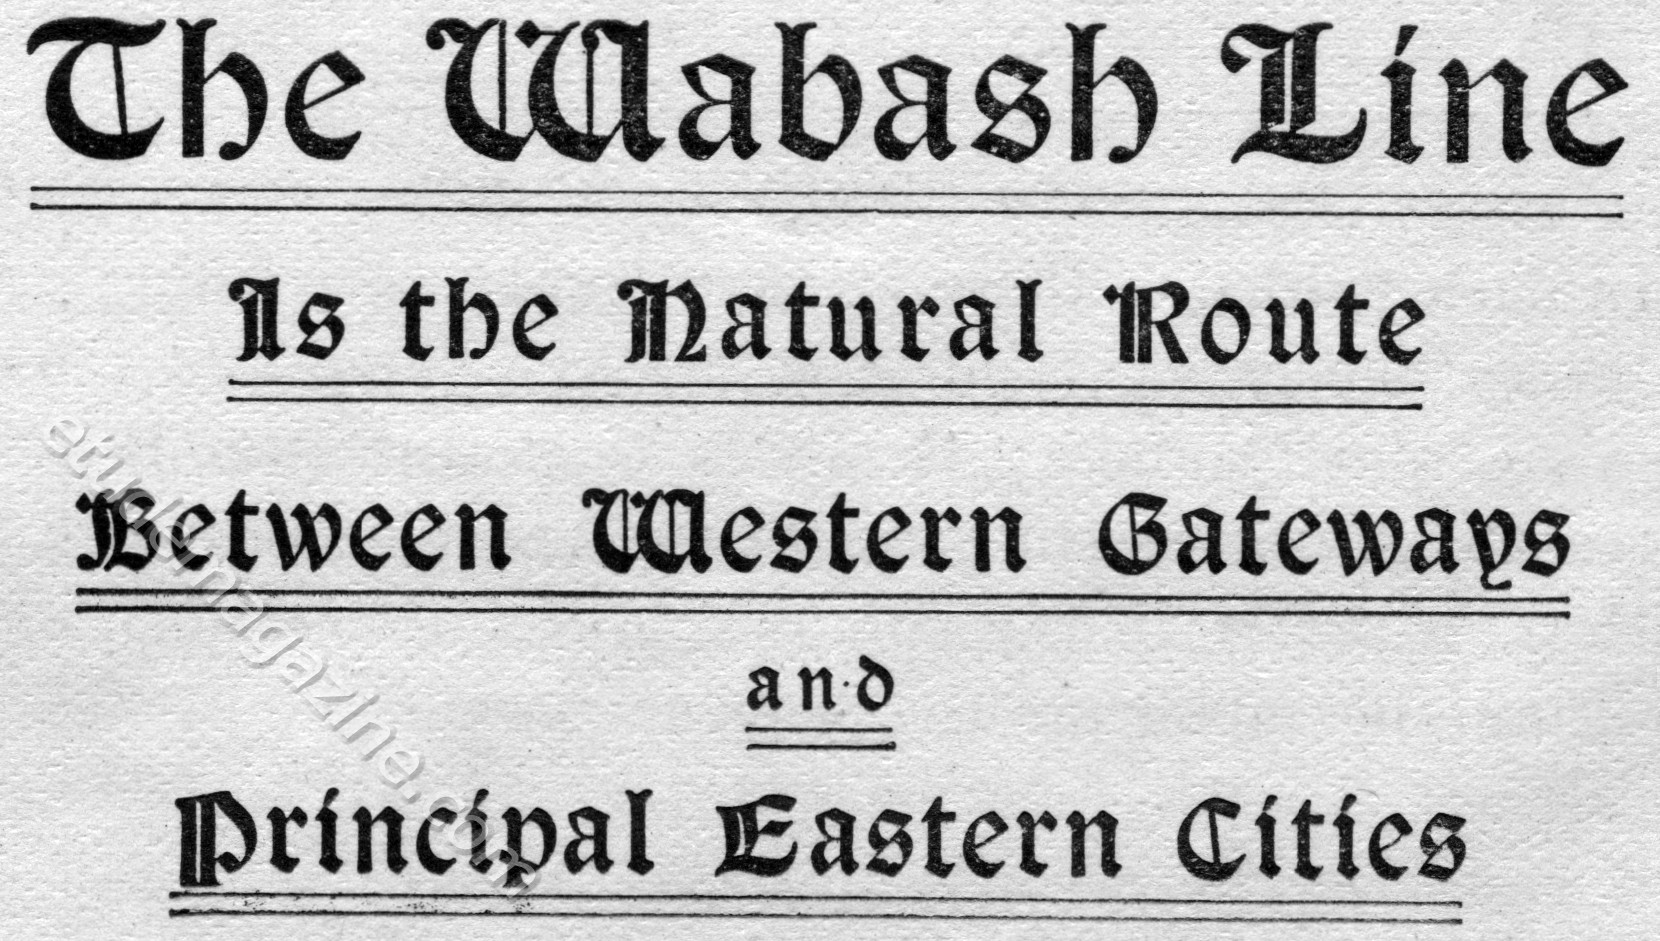 The Wabash Line Is the Natural Route